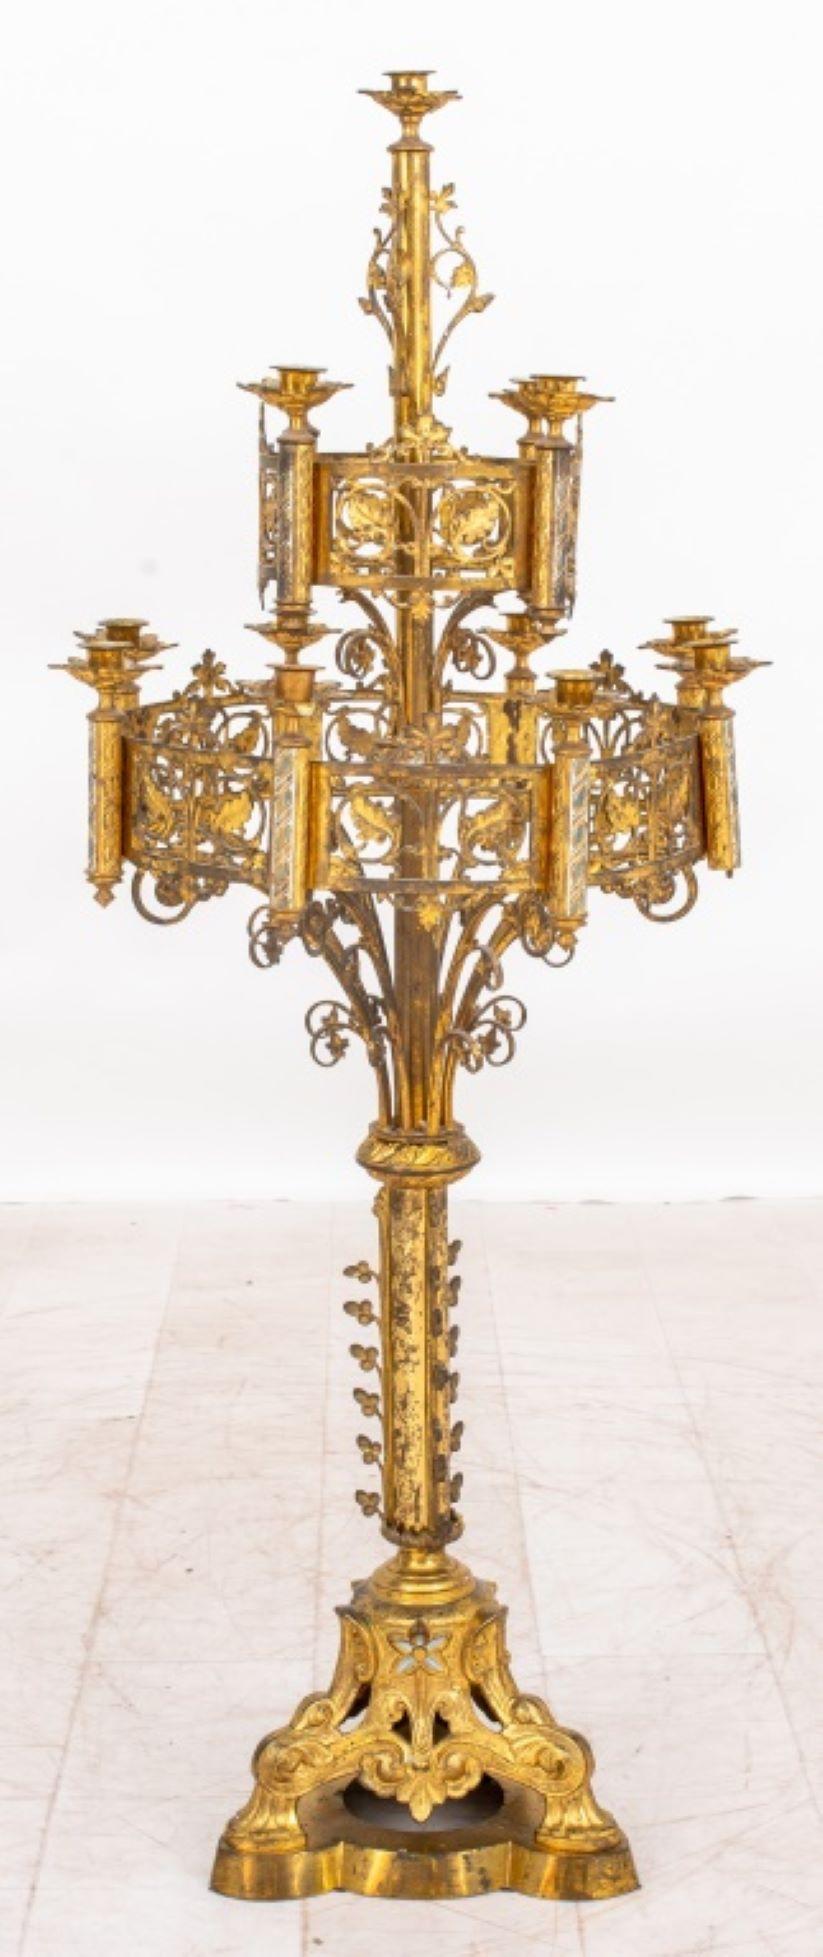 Pugin Manner Gothic Revival Candleabra, 19th Century In Good Condition For Sale In New York, NY